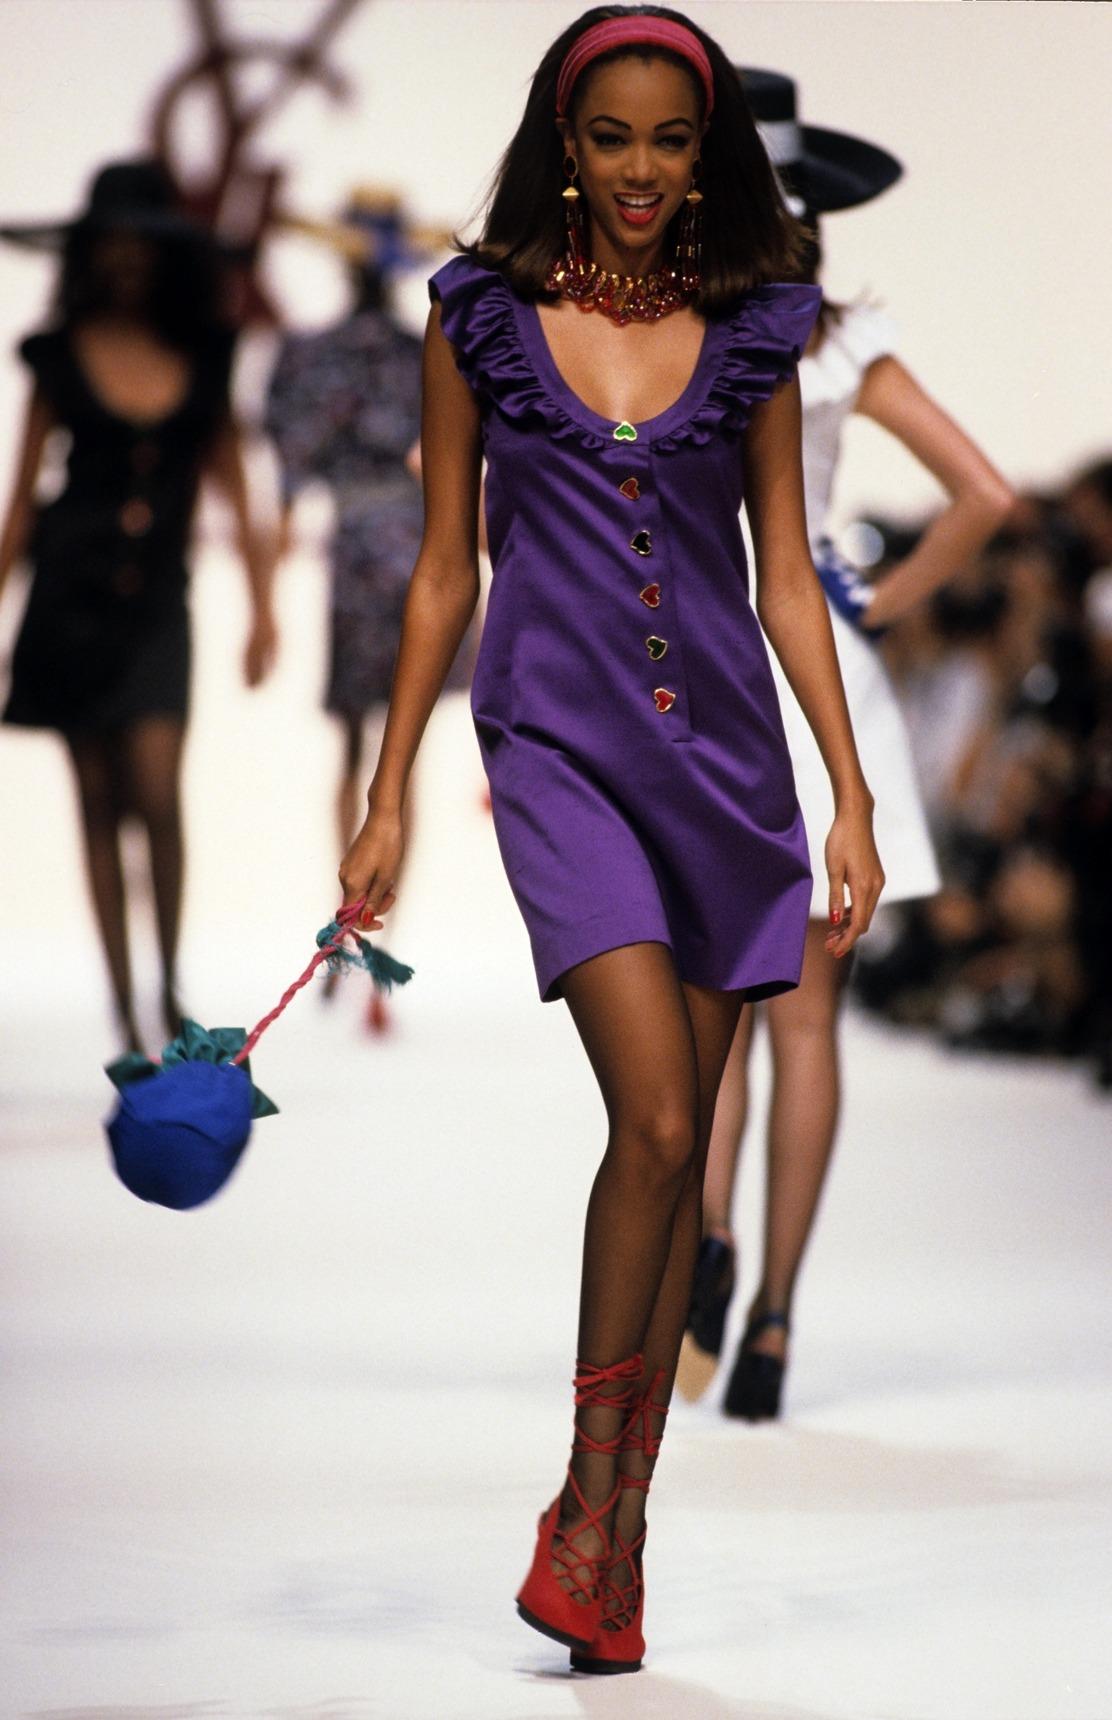 Presenting a fabulous bright green Yves Saint Laurent mini dress, designed by Yves Saint Laurent. From the Spring/Summer 1992 collection, this dress debuted on the season’s runway in purple, on Tyra Banks, and in black. Karen Mulder wore the black